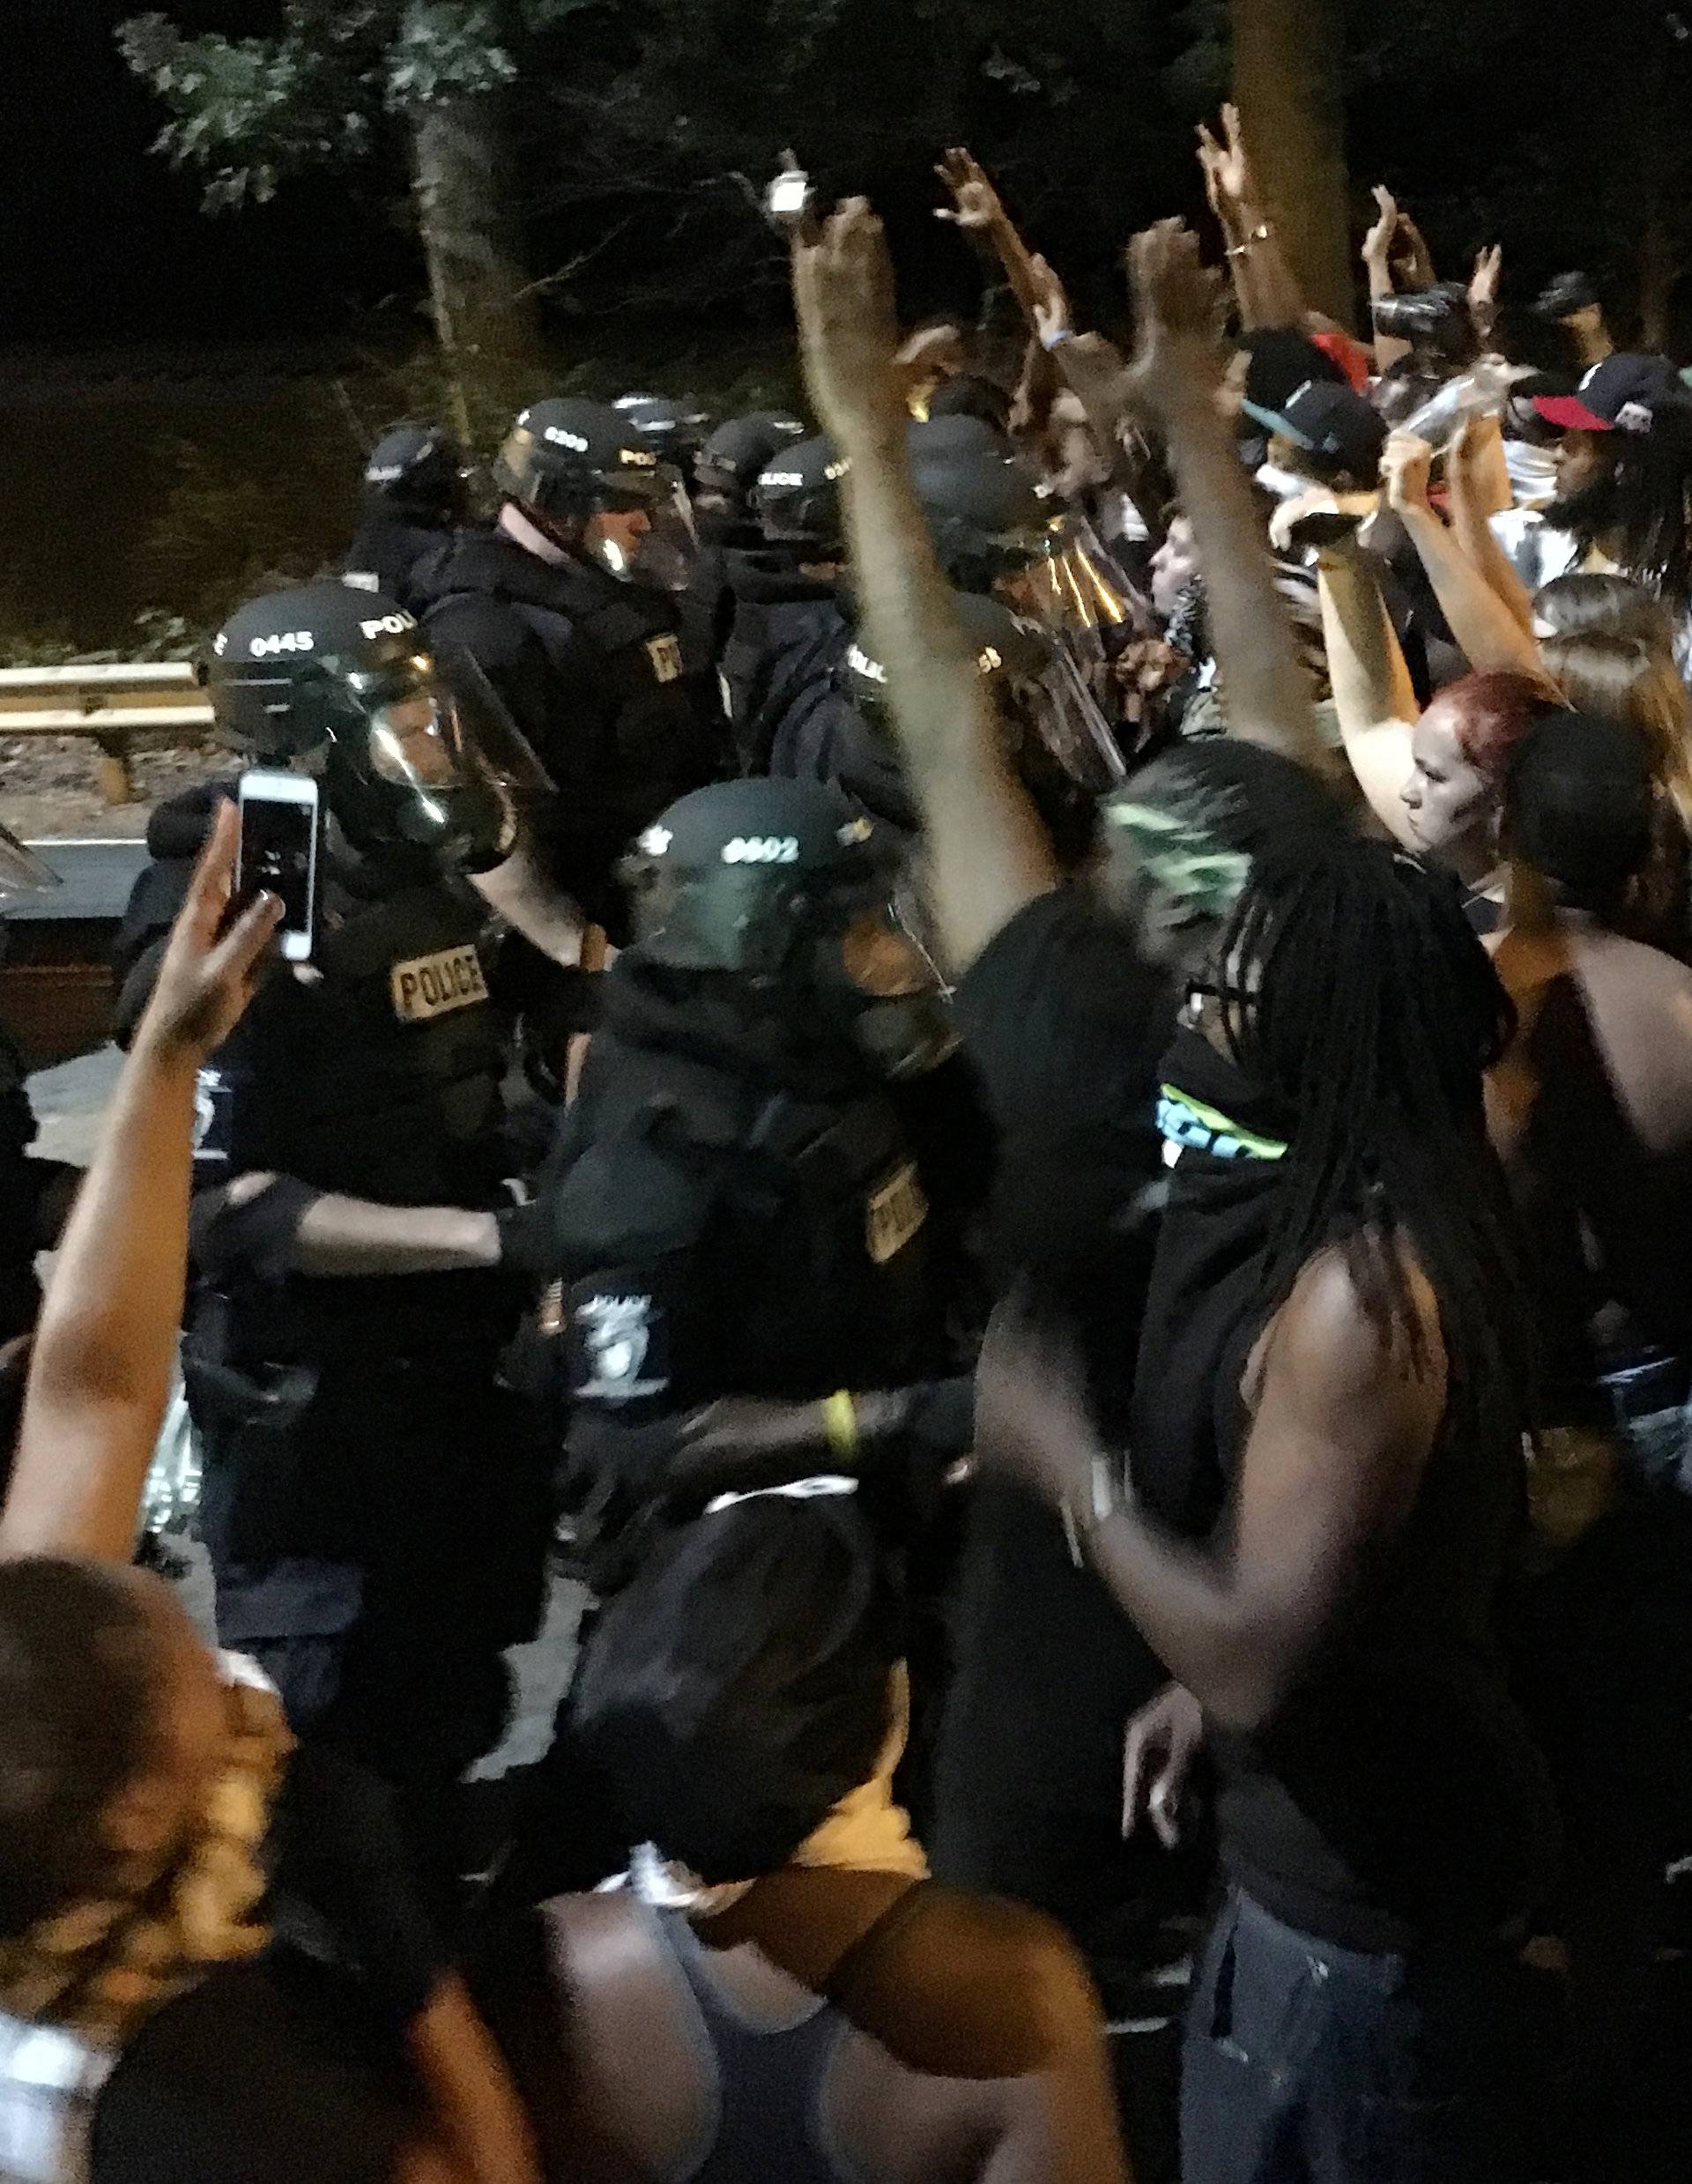 Protestors demonstrate in front of police officers wearing riot gear after police fatally shot Keith Lamont Scott in the parking lot of an apartment complex in Charlotte